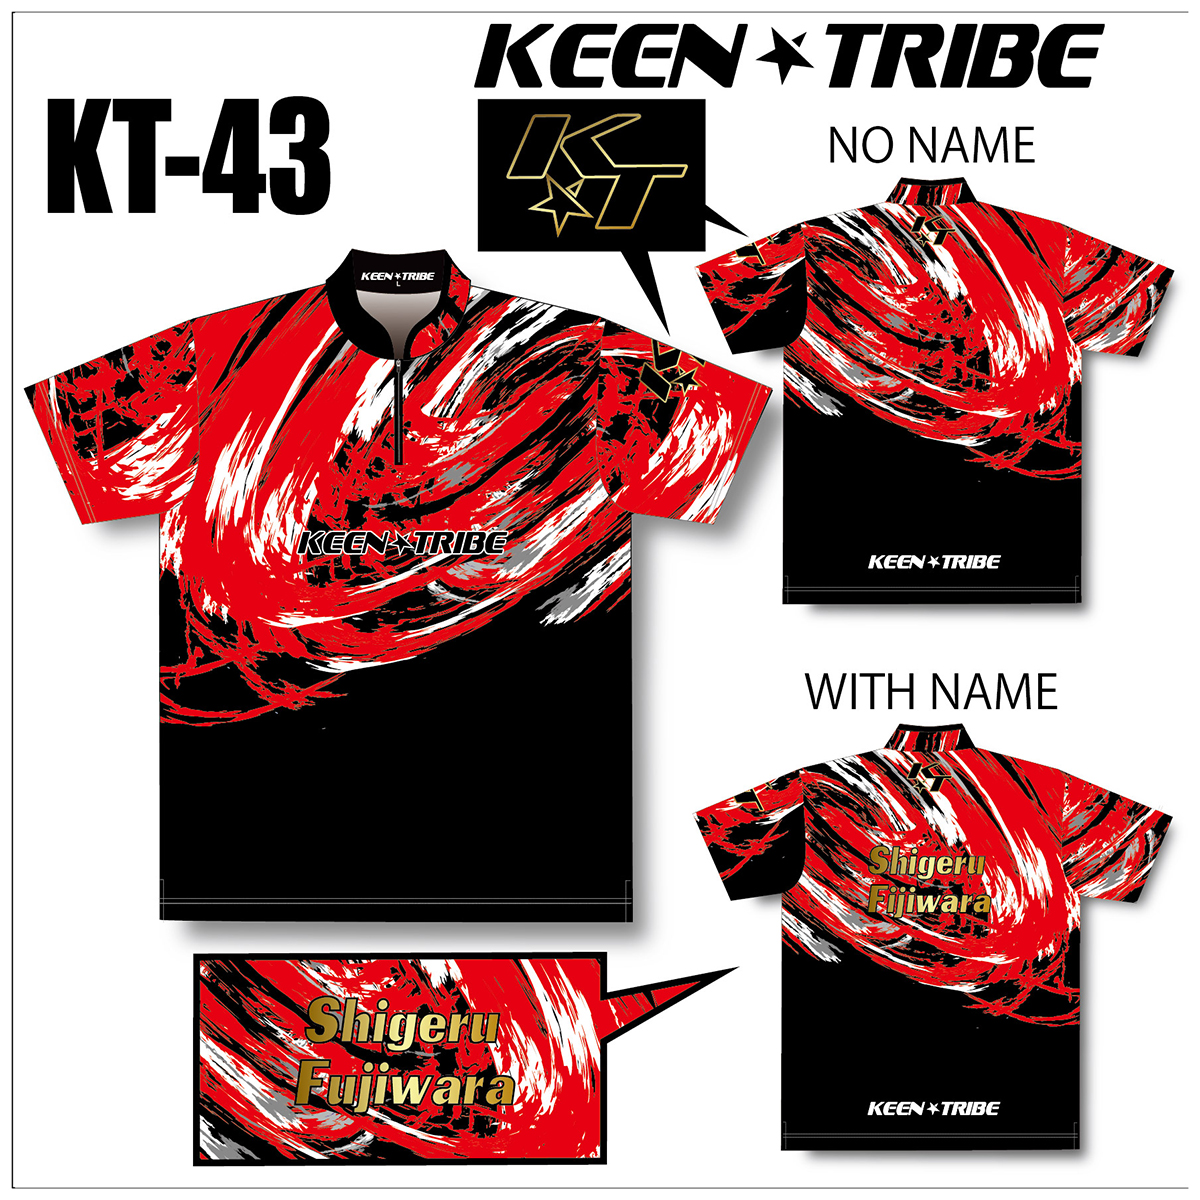 KEEN ★ TRIBE　KT-43(受注生産)